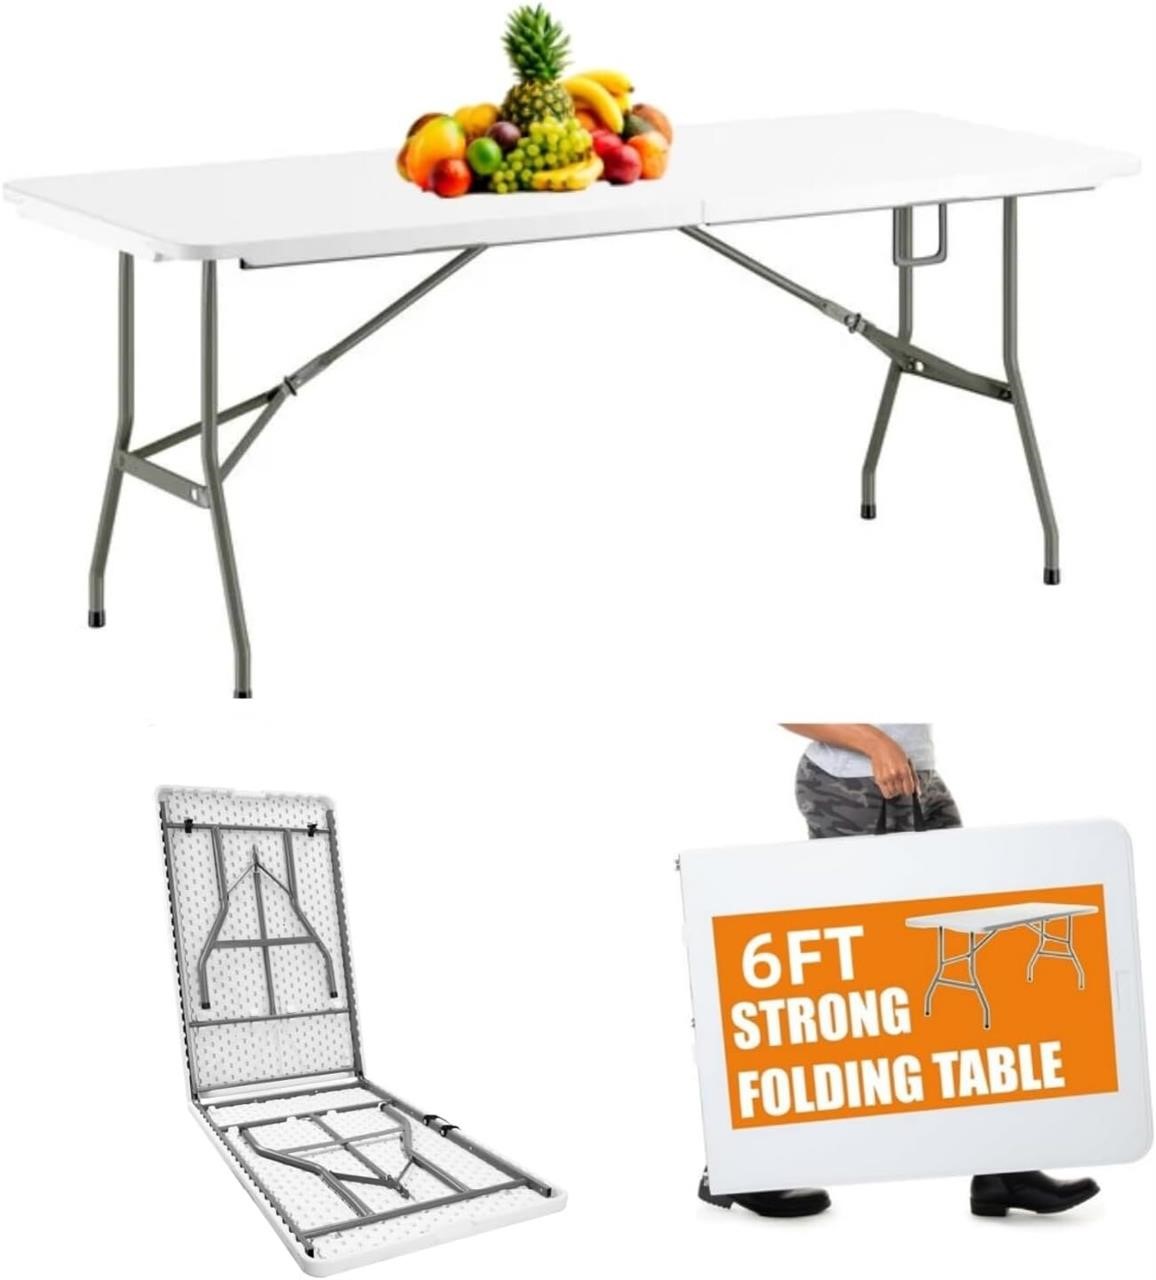 6FT30x72 Folding Table  Indoor/Outdoor Use